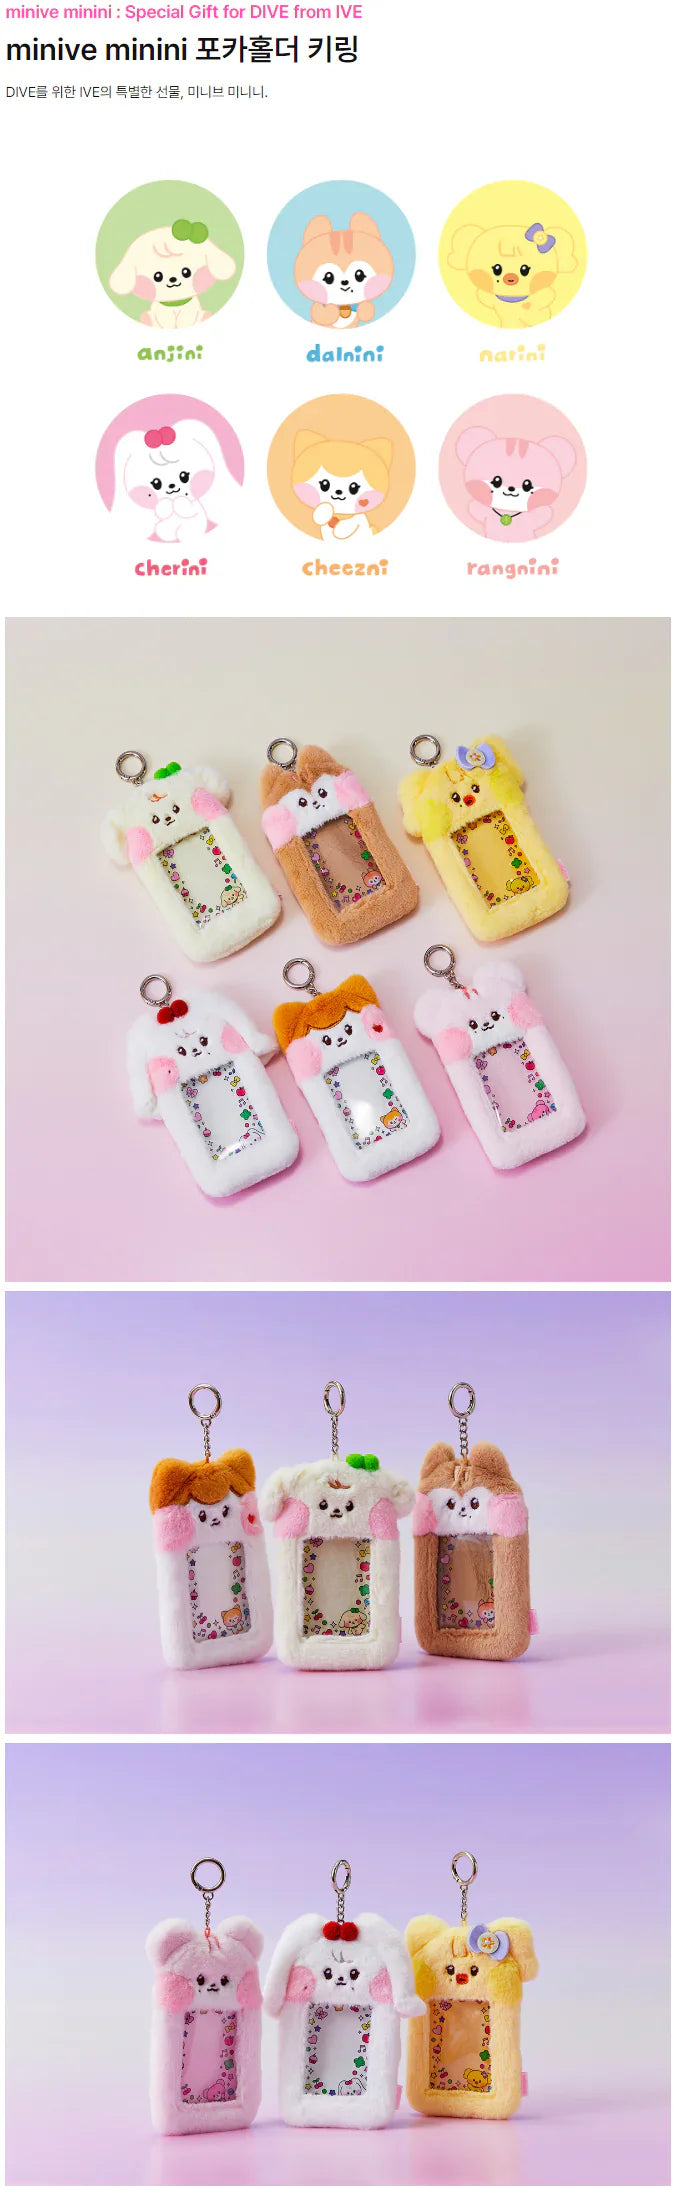 [PRE ORDER] IVE - MINIVE- MININI ( Official MD) Photocard Holder﻿ Keyring